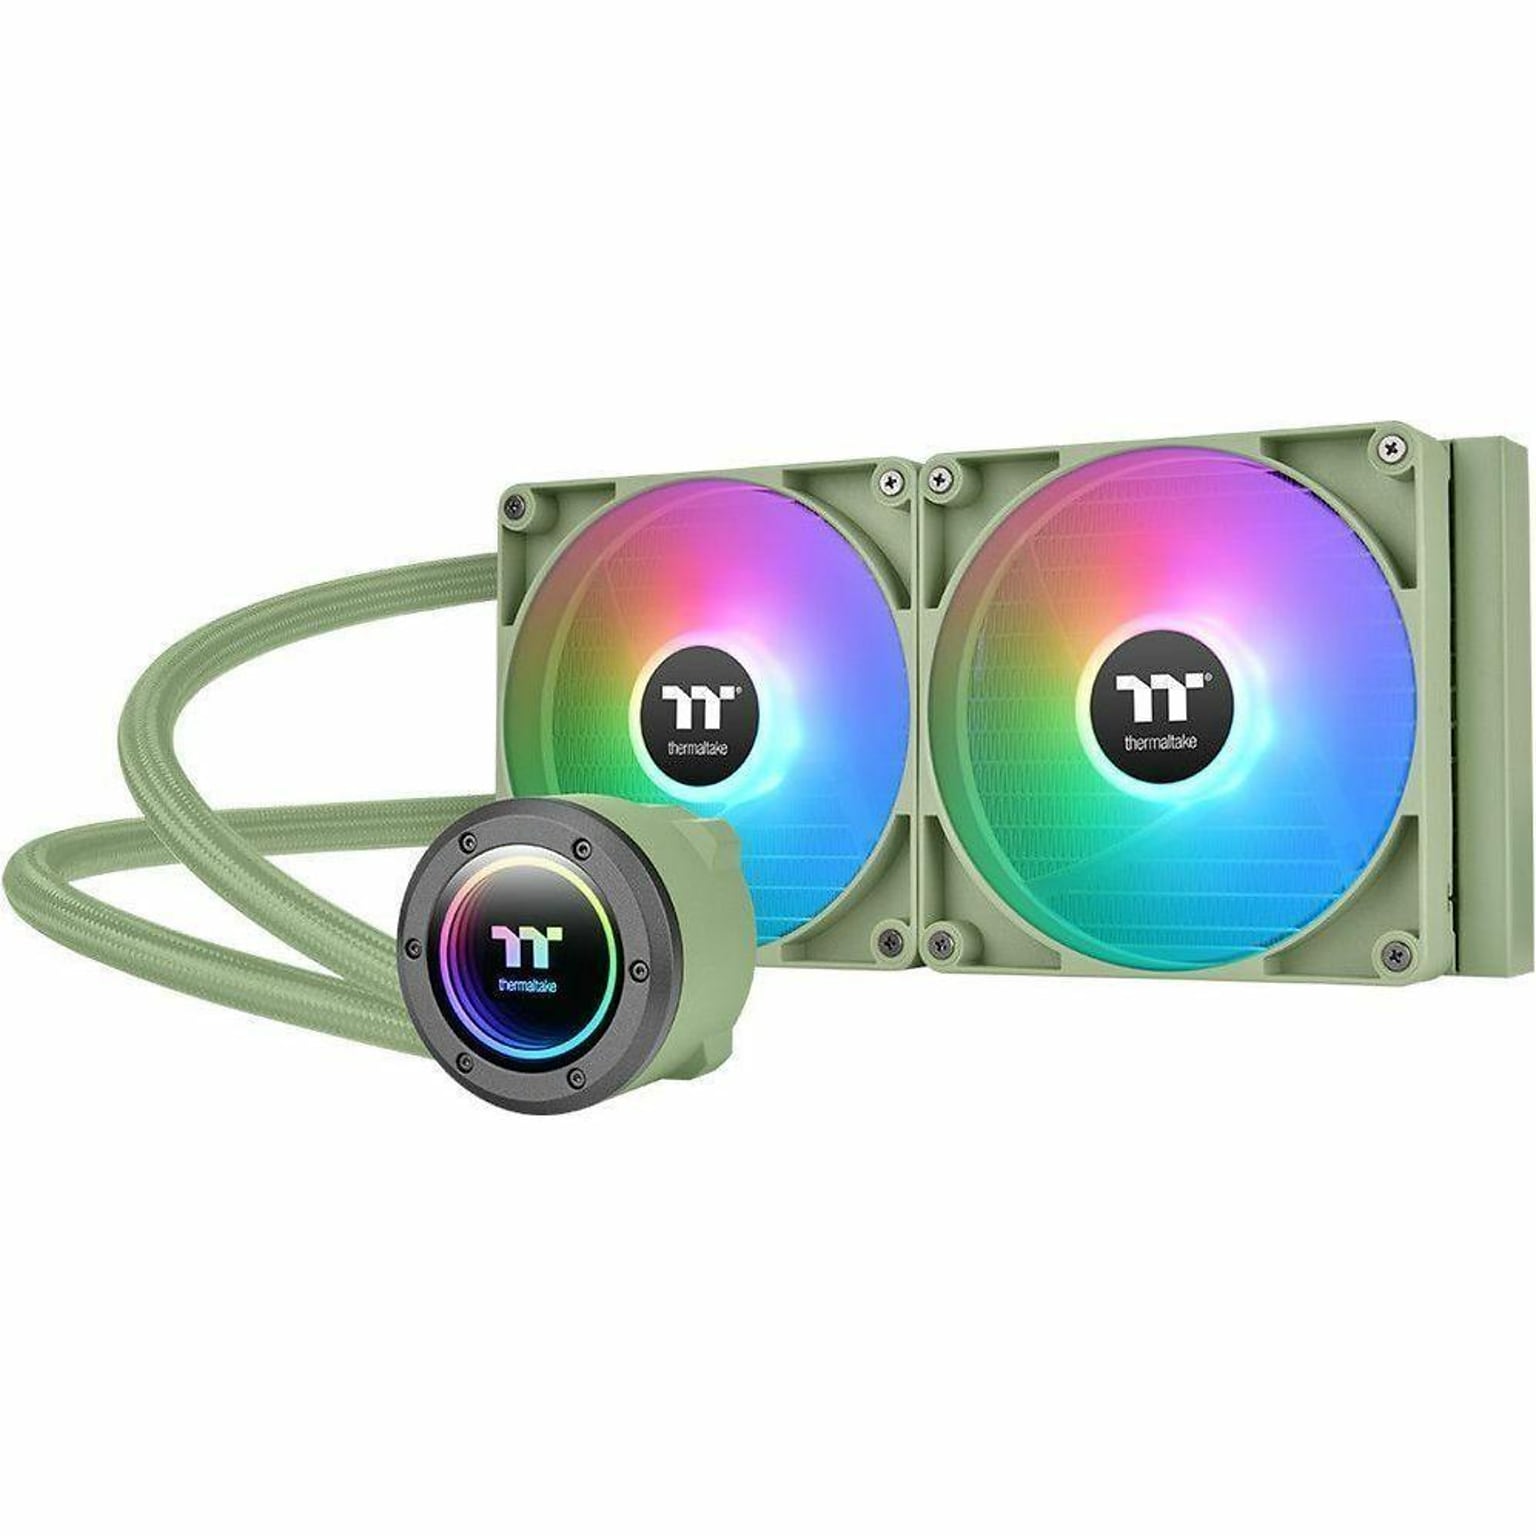 Thermaltake TH280 V2 ARGB Sync 140mm Cooling Fan/Radiator/Water Block/Pump with RGB Lighting (CLW375PL14MGA)